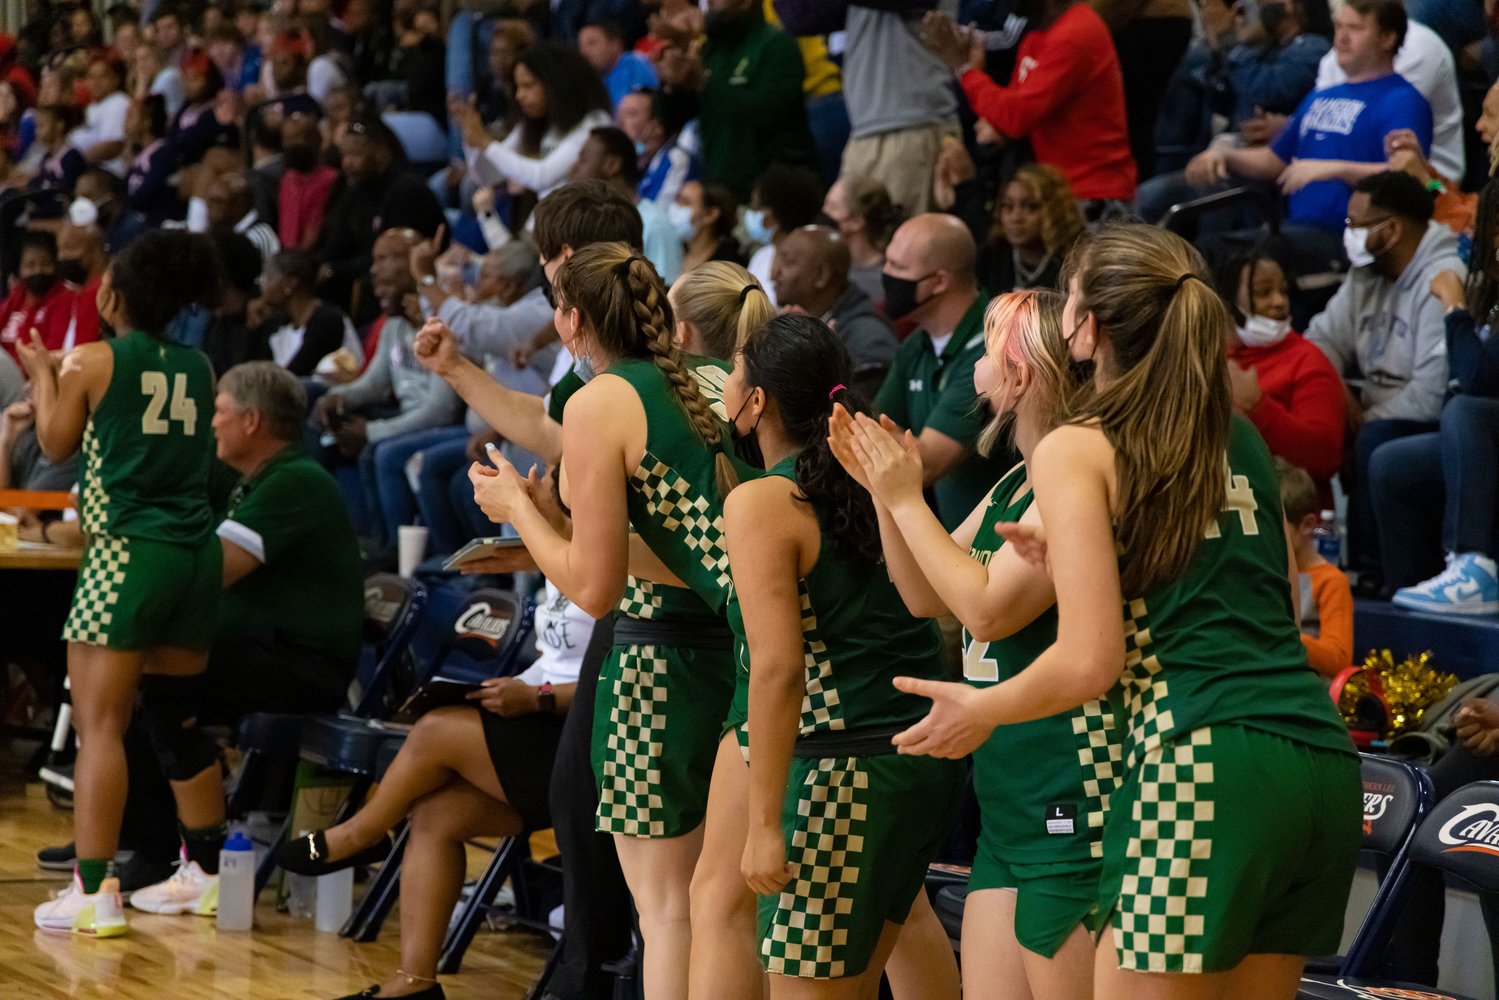 The Northwood women's basketball team bench explodes in cheers during the Chargers' 51-50 upset of the Terry Sanford Bulldogs in the 3A East Regional Championship on Saturday.